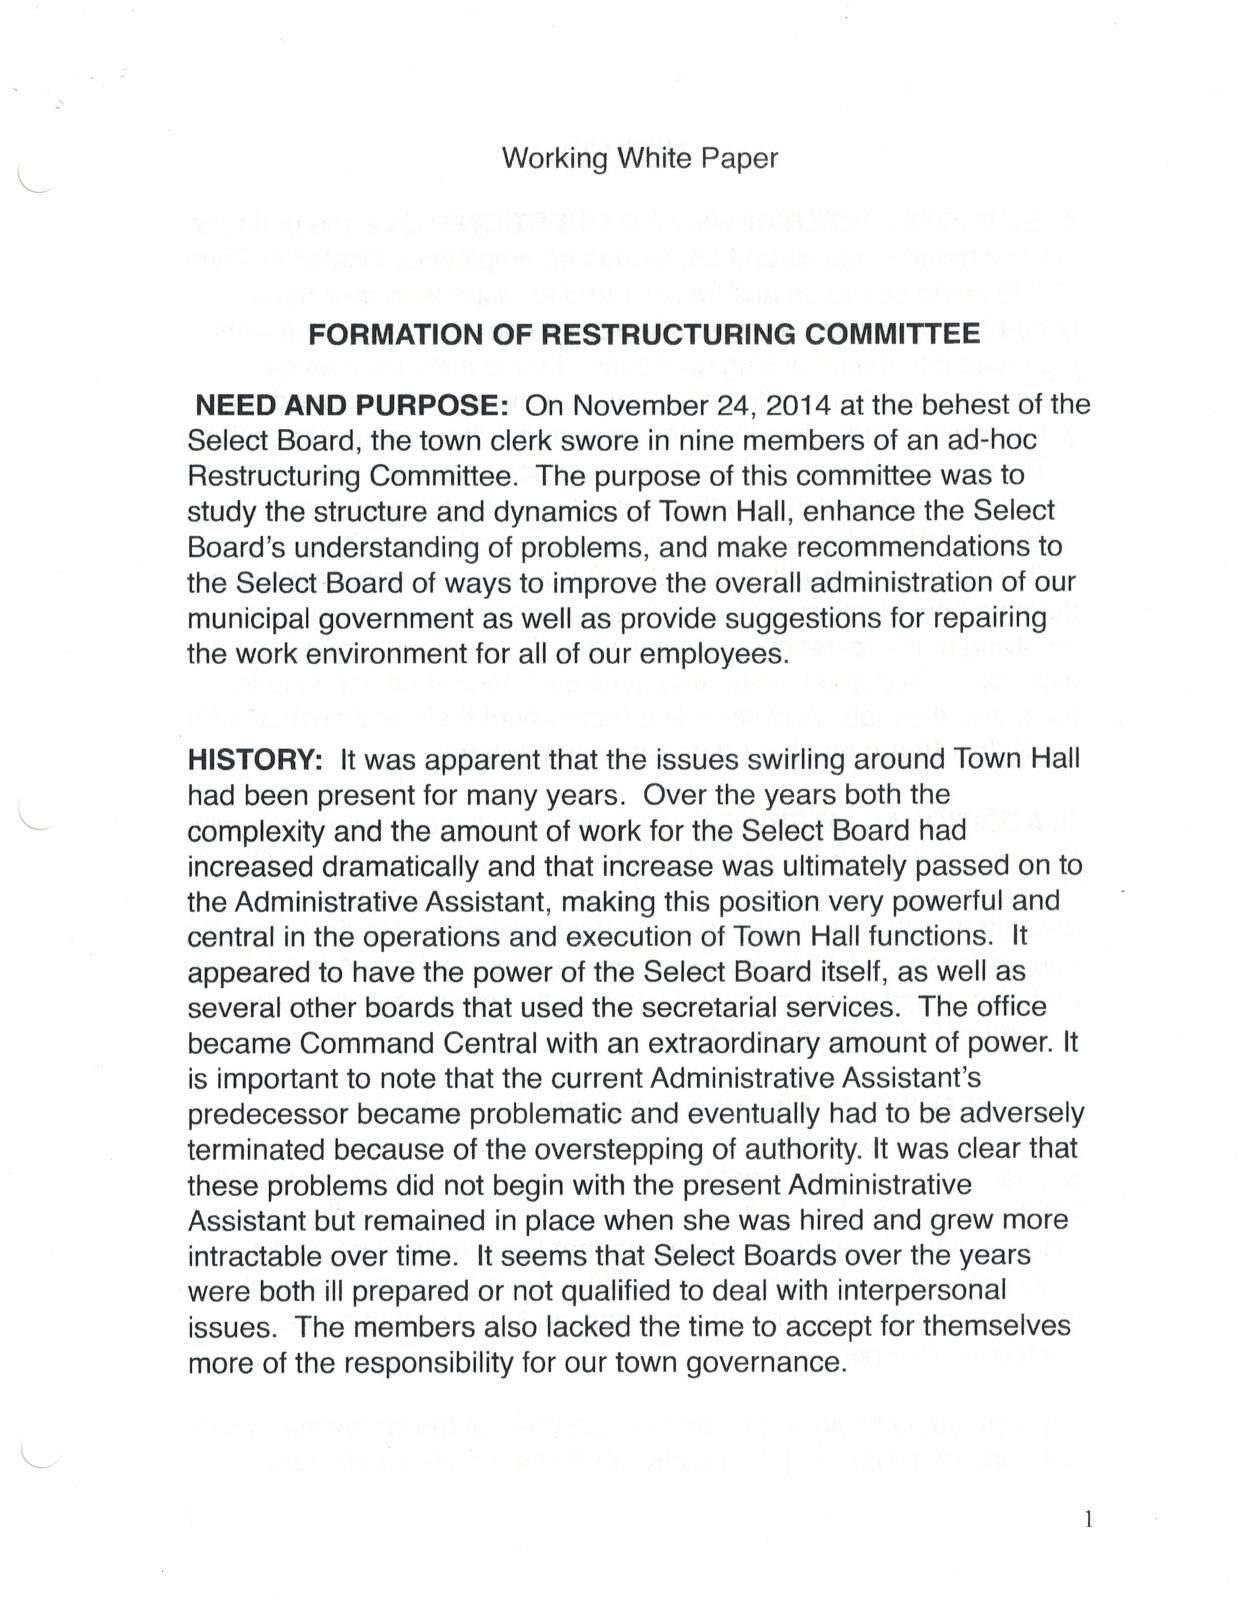 Monterey Restructuring Committee paper